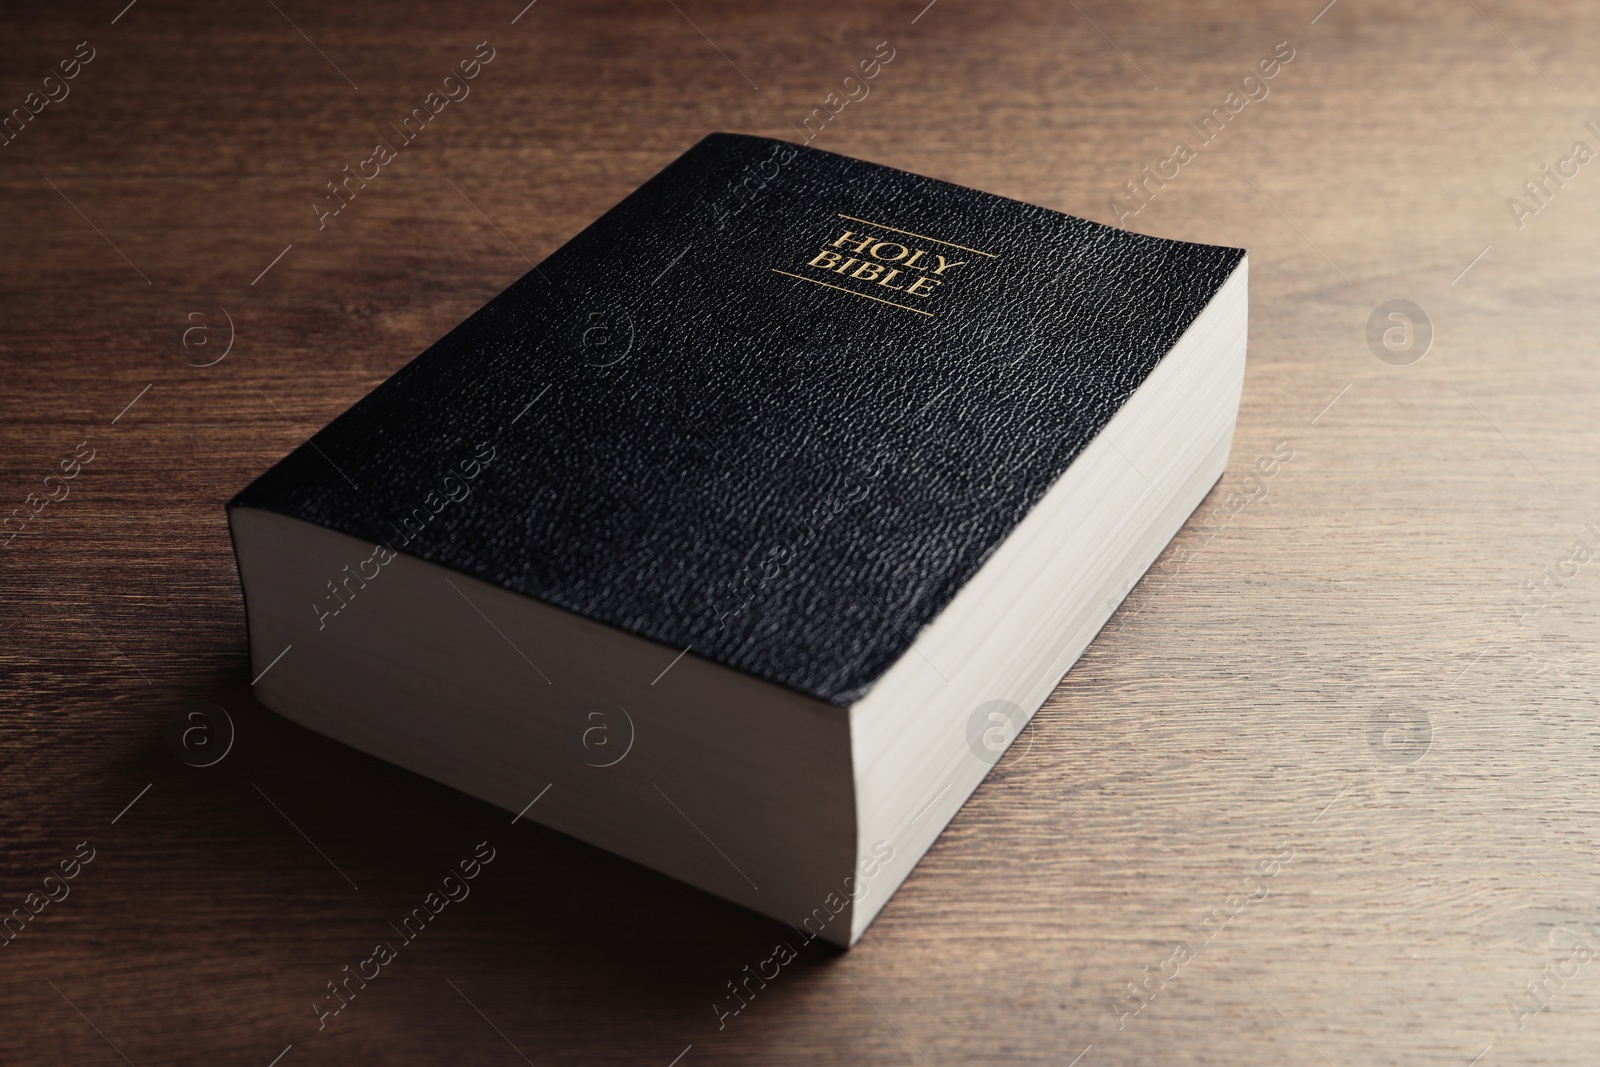 Photo of Holy Bible on wooden table, closeup. Religious book